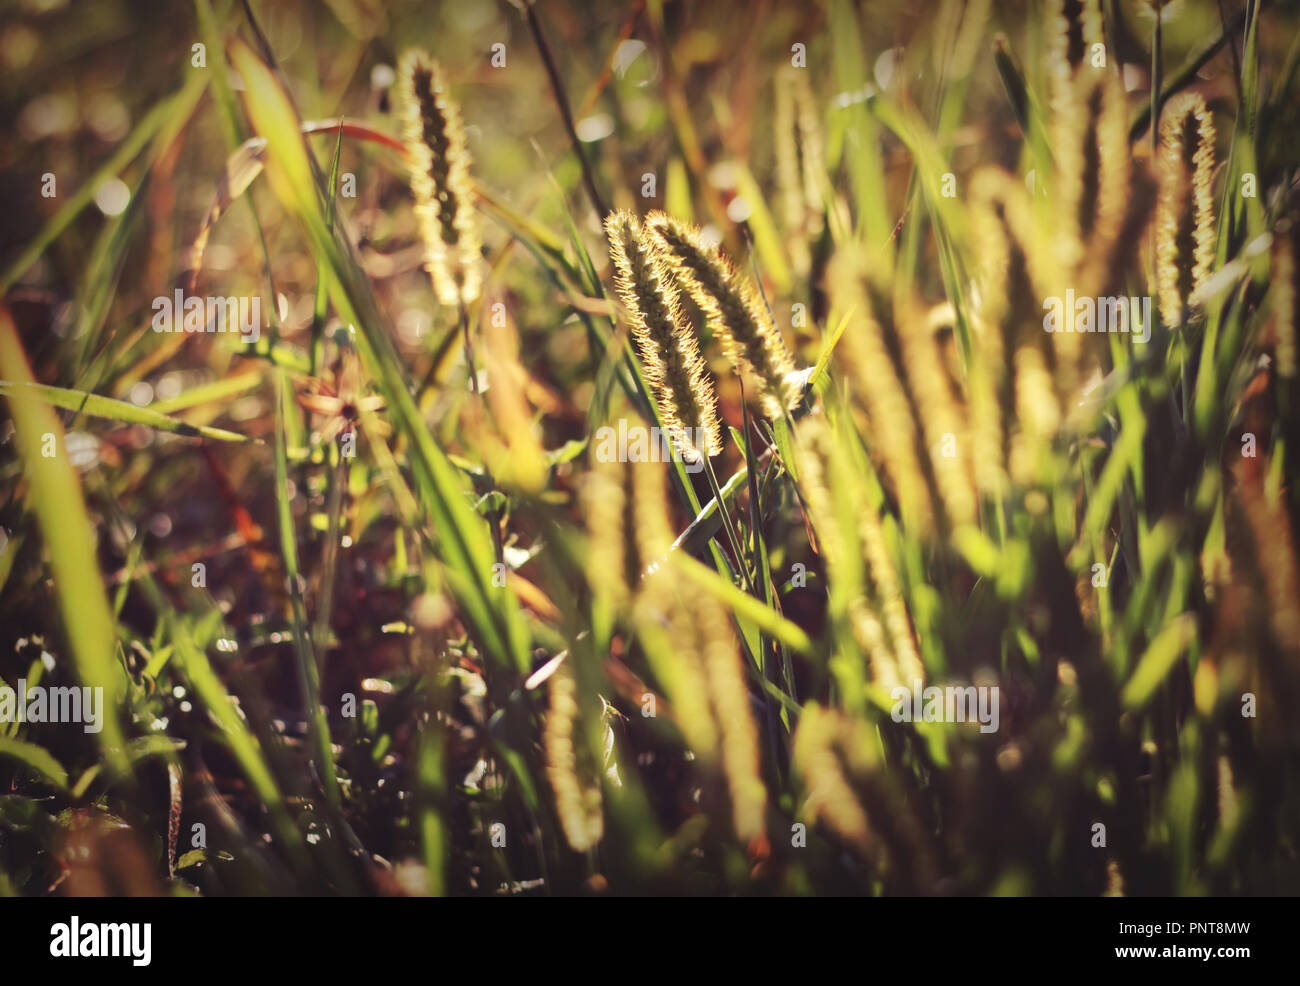 Foxtail grass in the morning sun Stock Photo